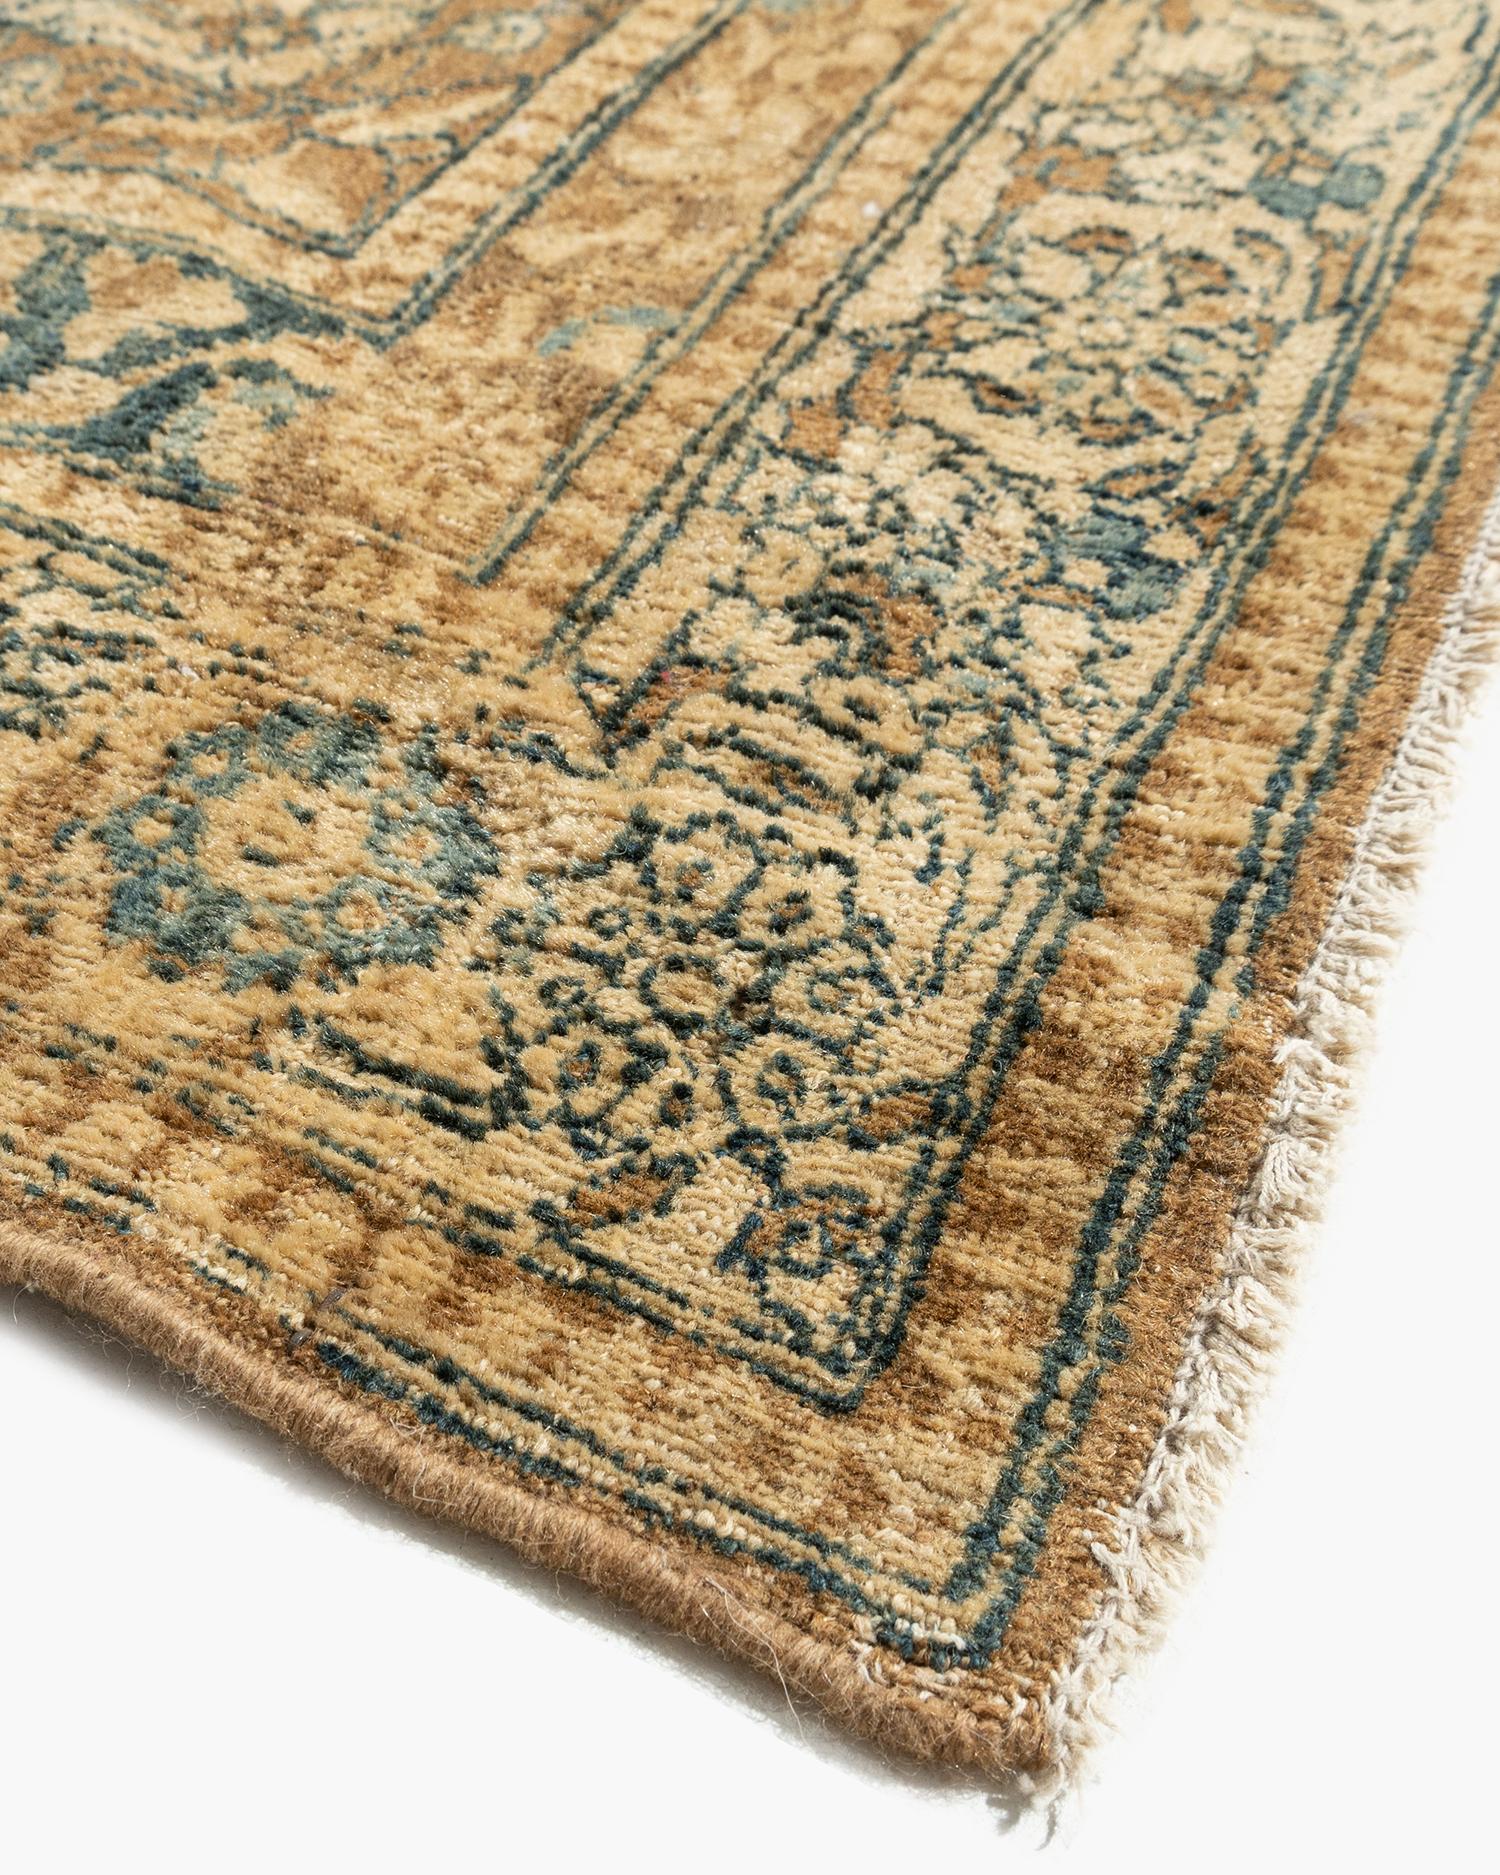 Antique Persian Oversized Distressed Fine Isfahan Rug  11'7x19'5 For Sale 9